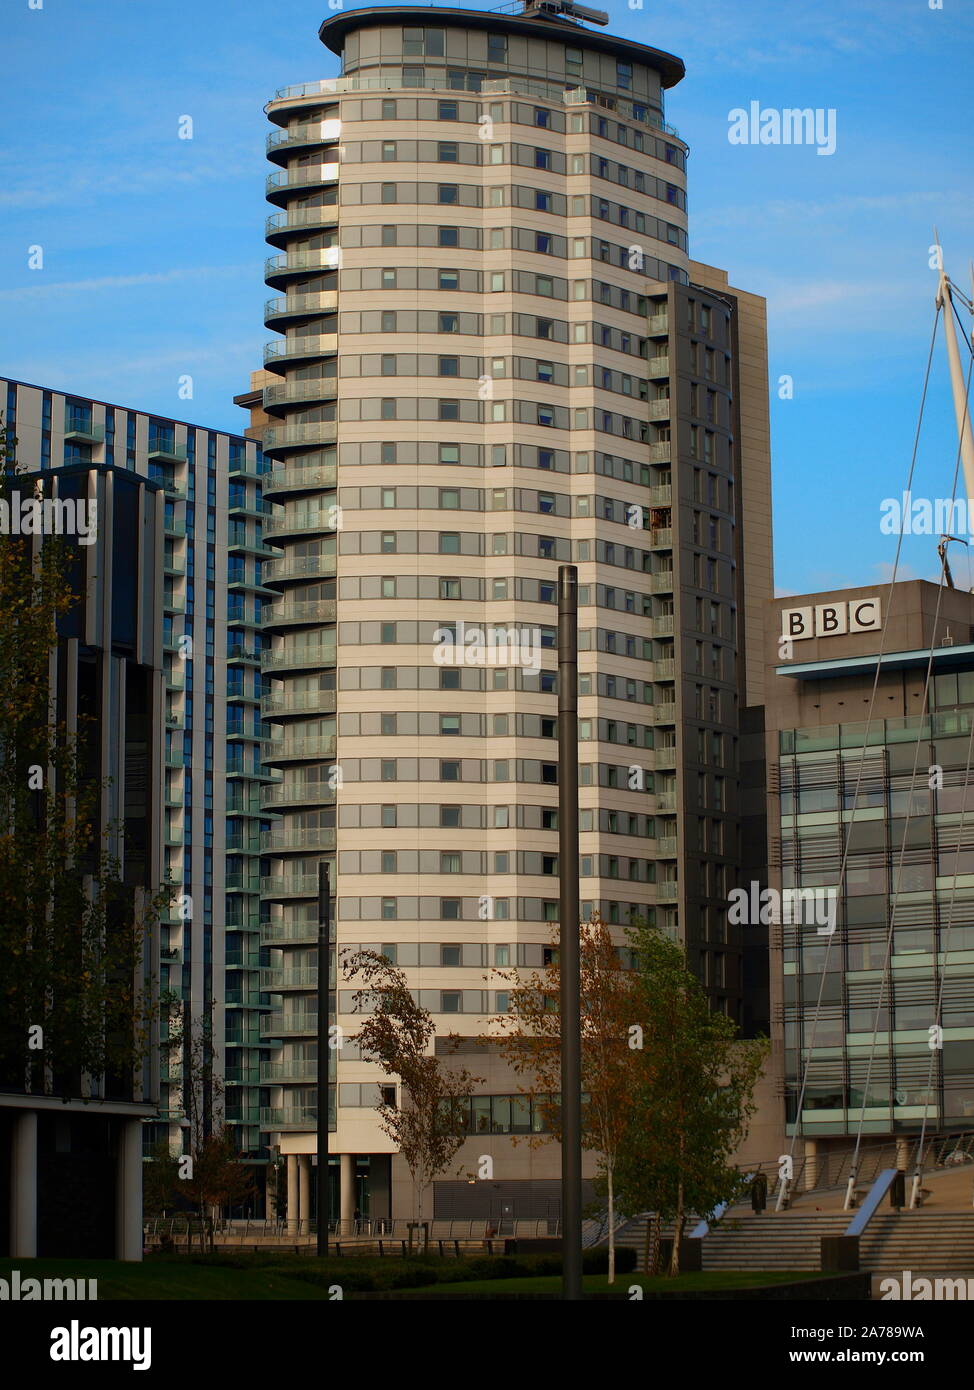 Tower building, Media city, salford quays, manchester. Stock Photo